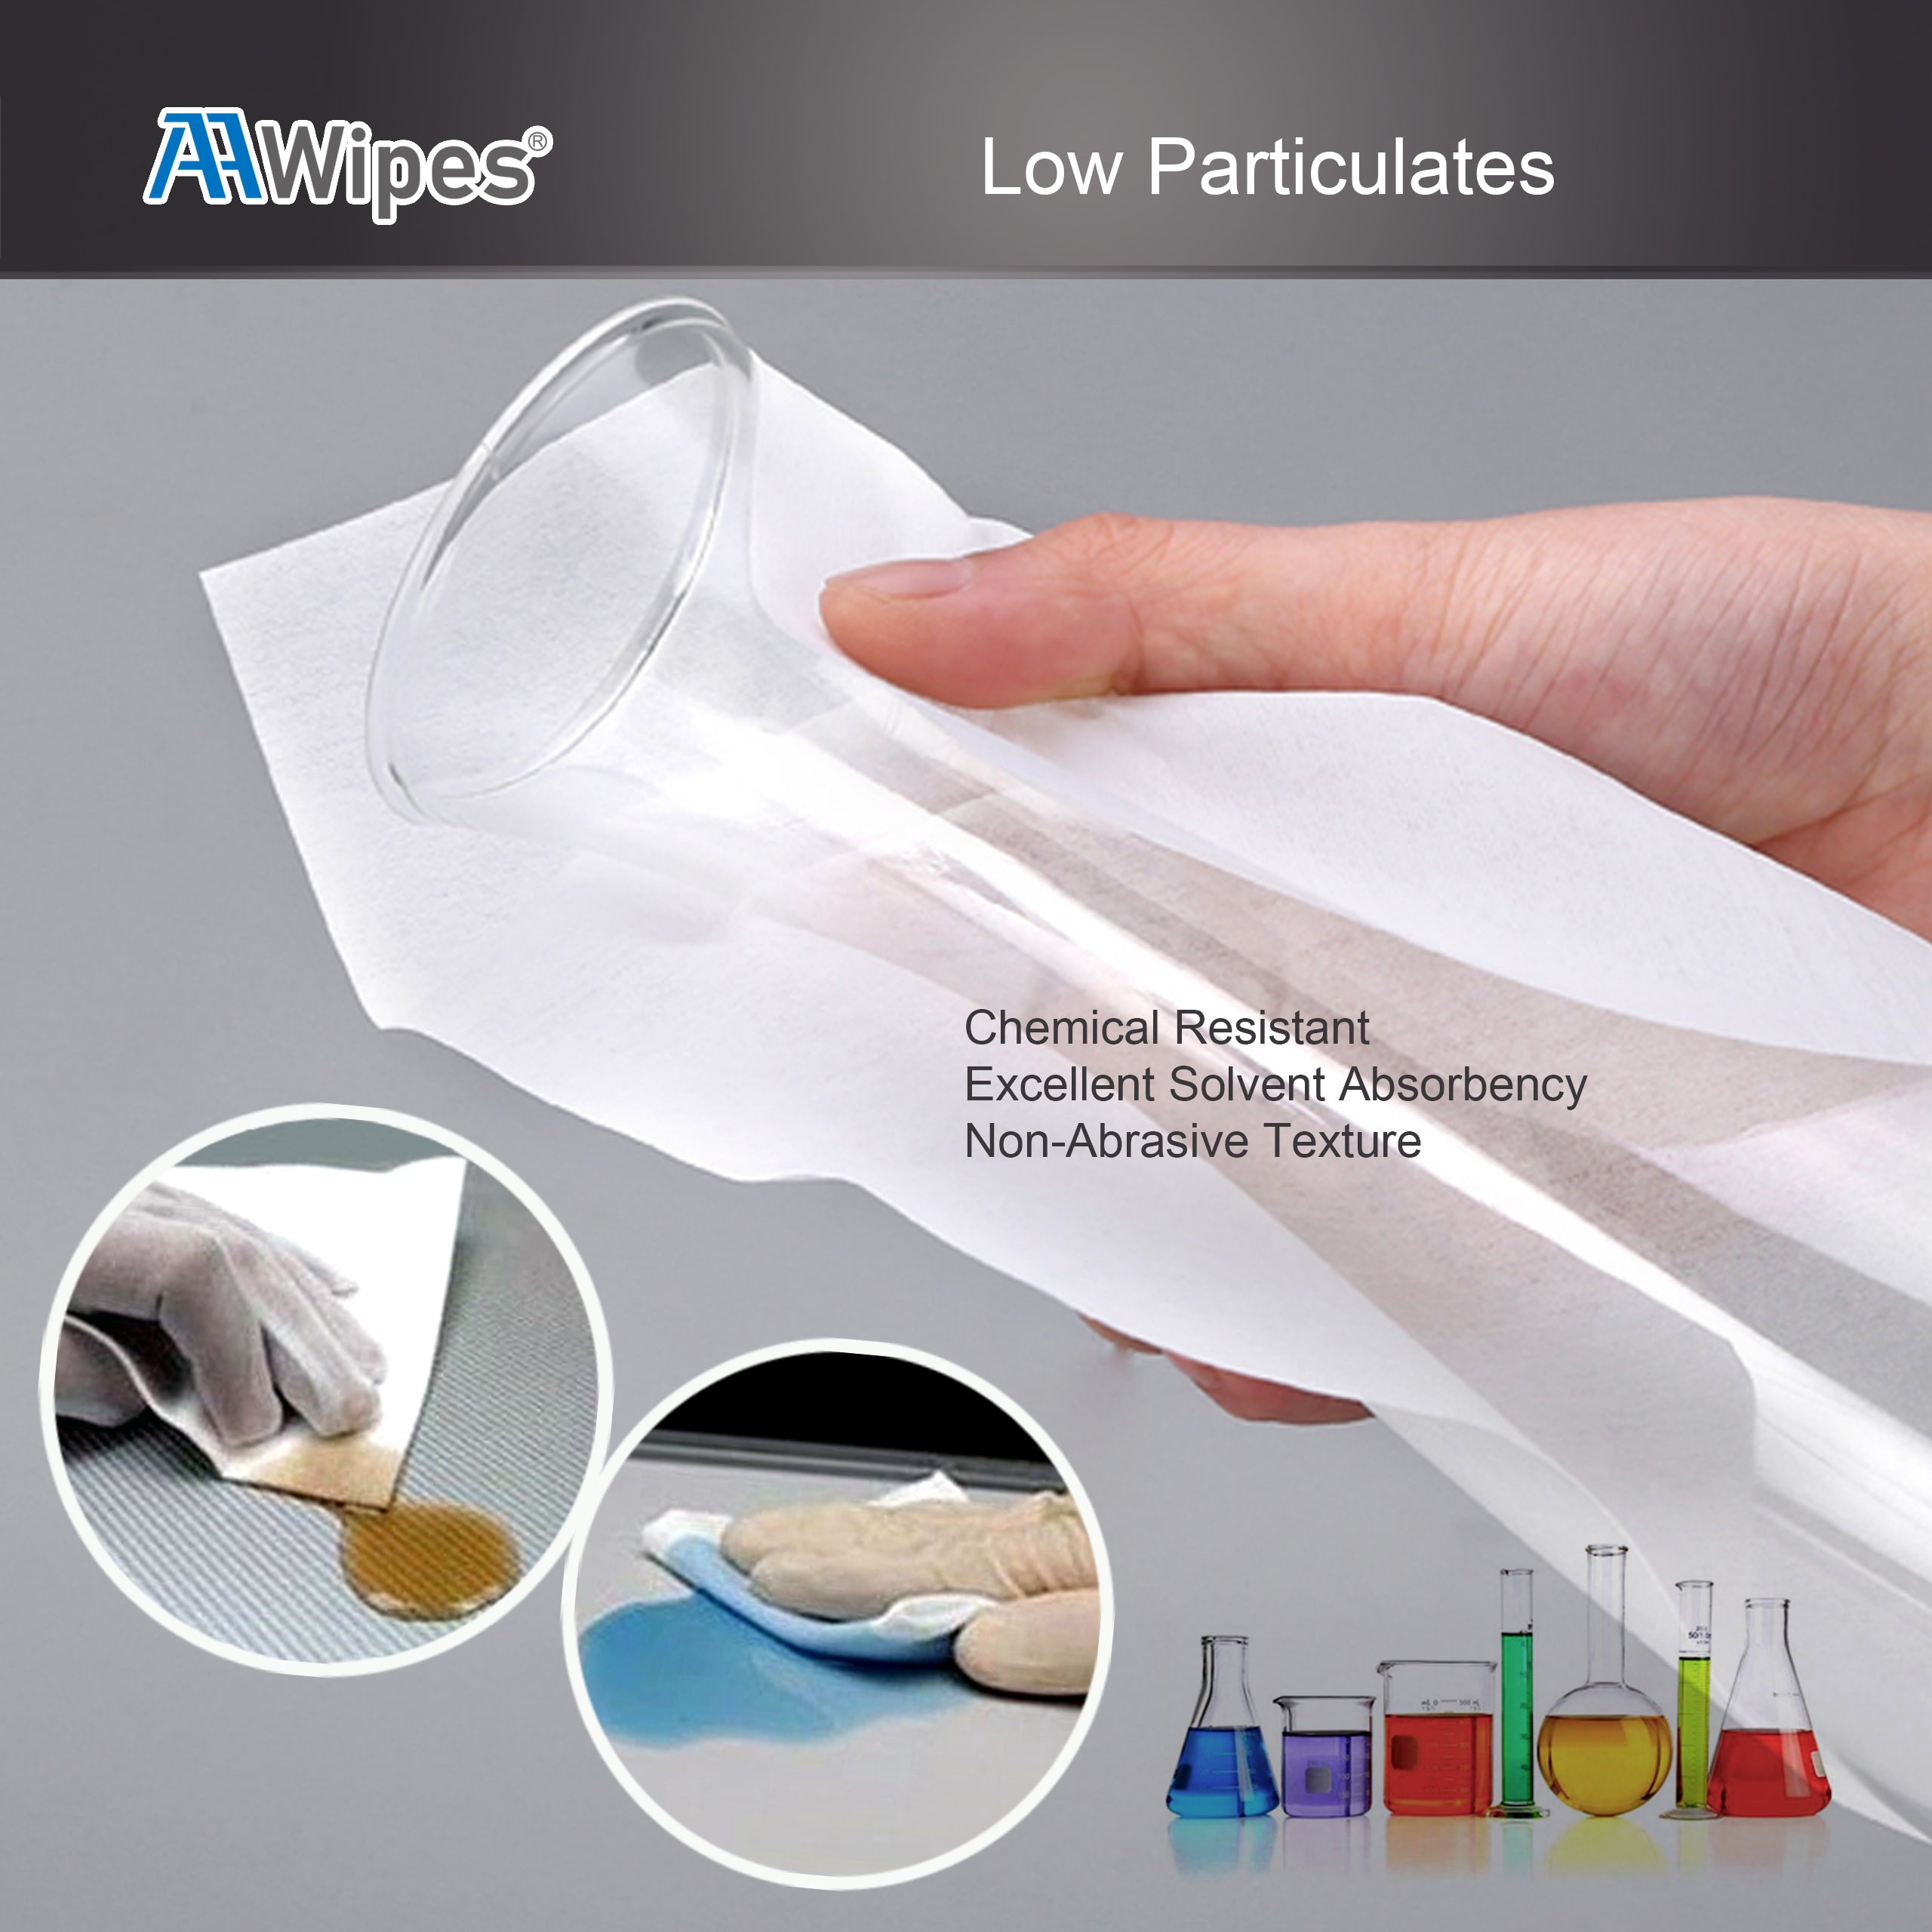 Cleanroom Wipers Nonwoven Wipes 4"x4" Cellulose/Polyester Wiping Cloth for Lab, Electronics, Automotive, Printing and Semiconductor Industries. 16,800 wipes/box in 28 bags (No. NW06804).